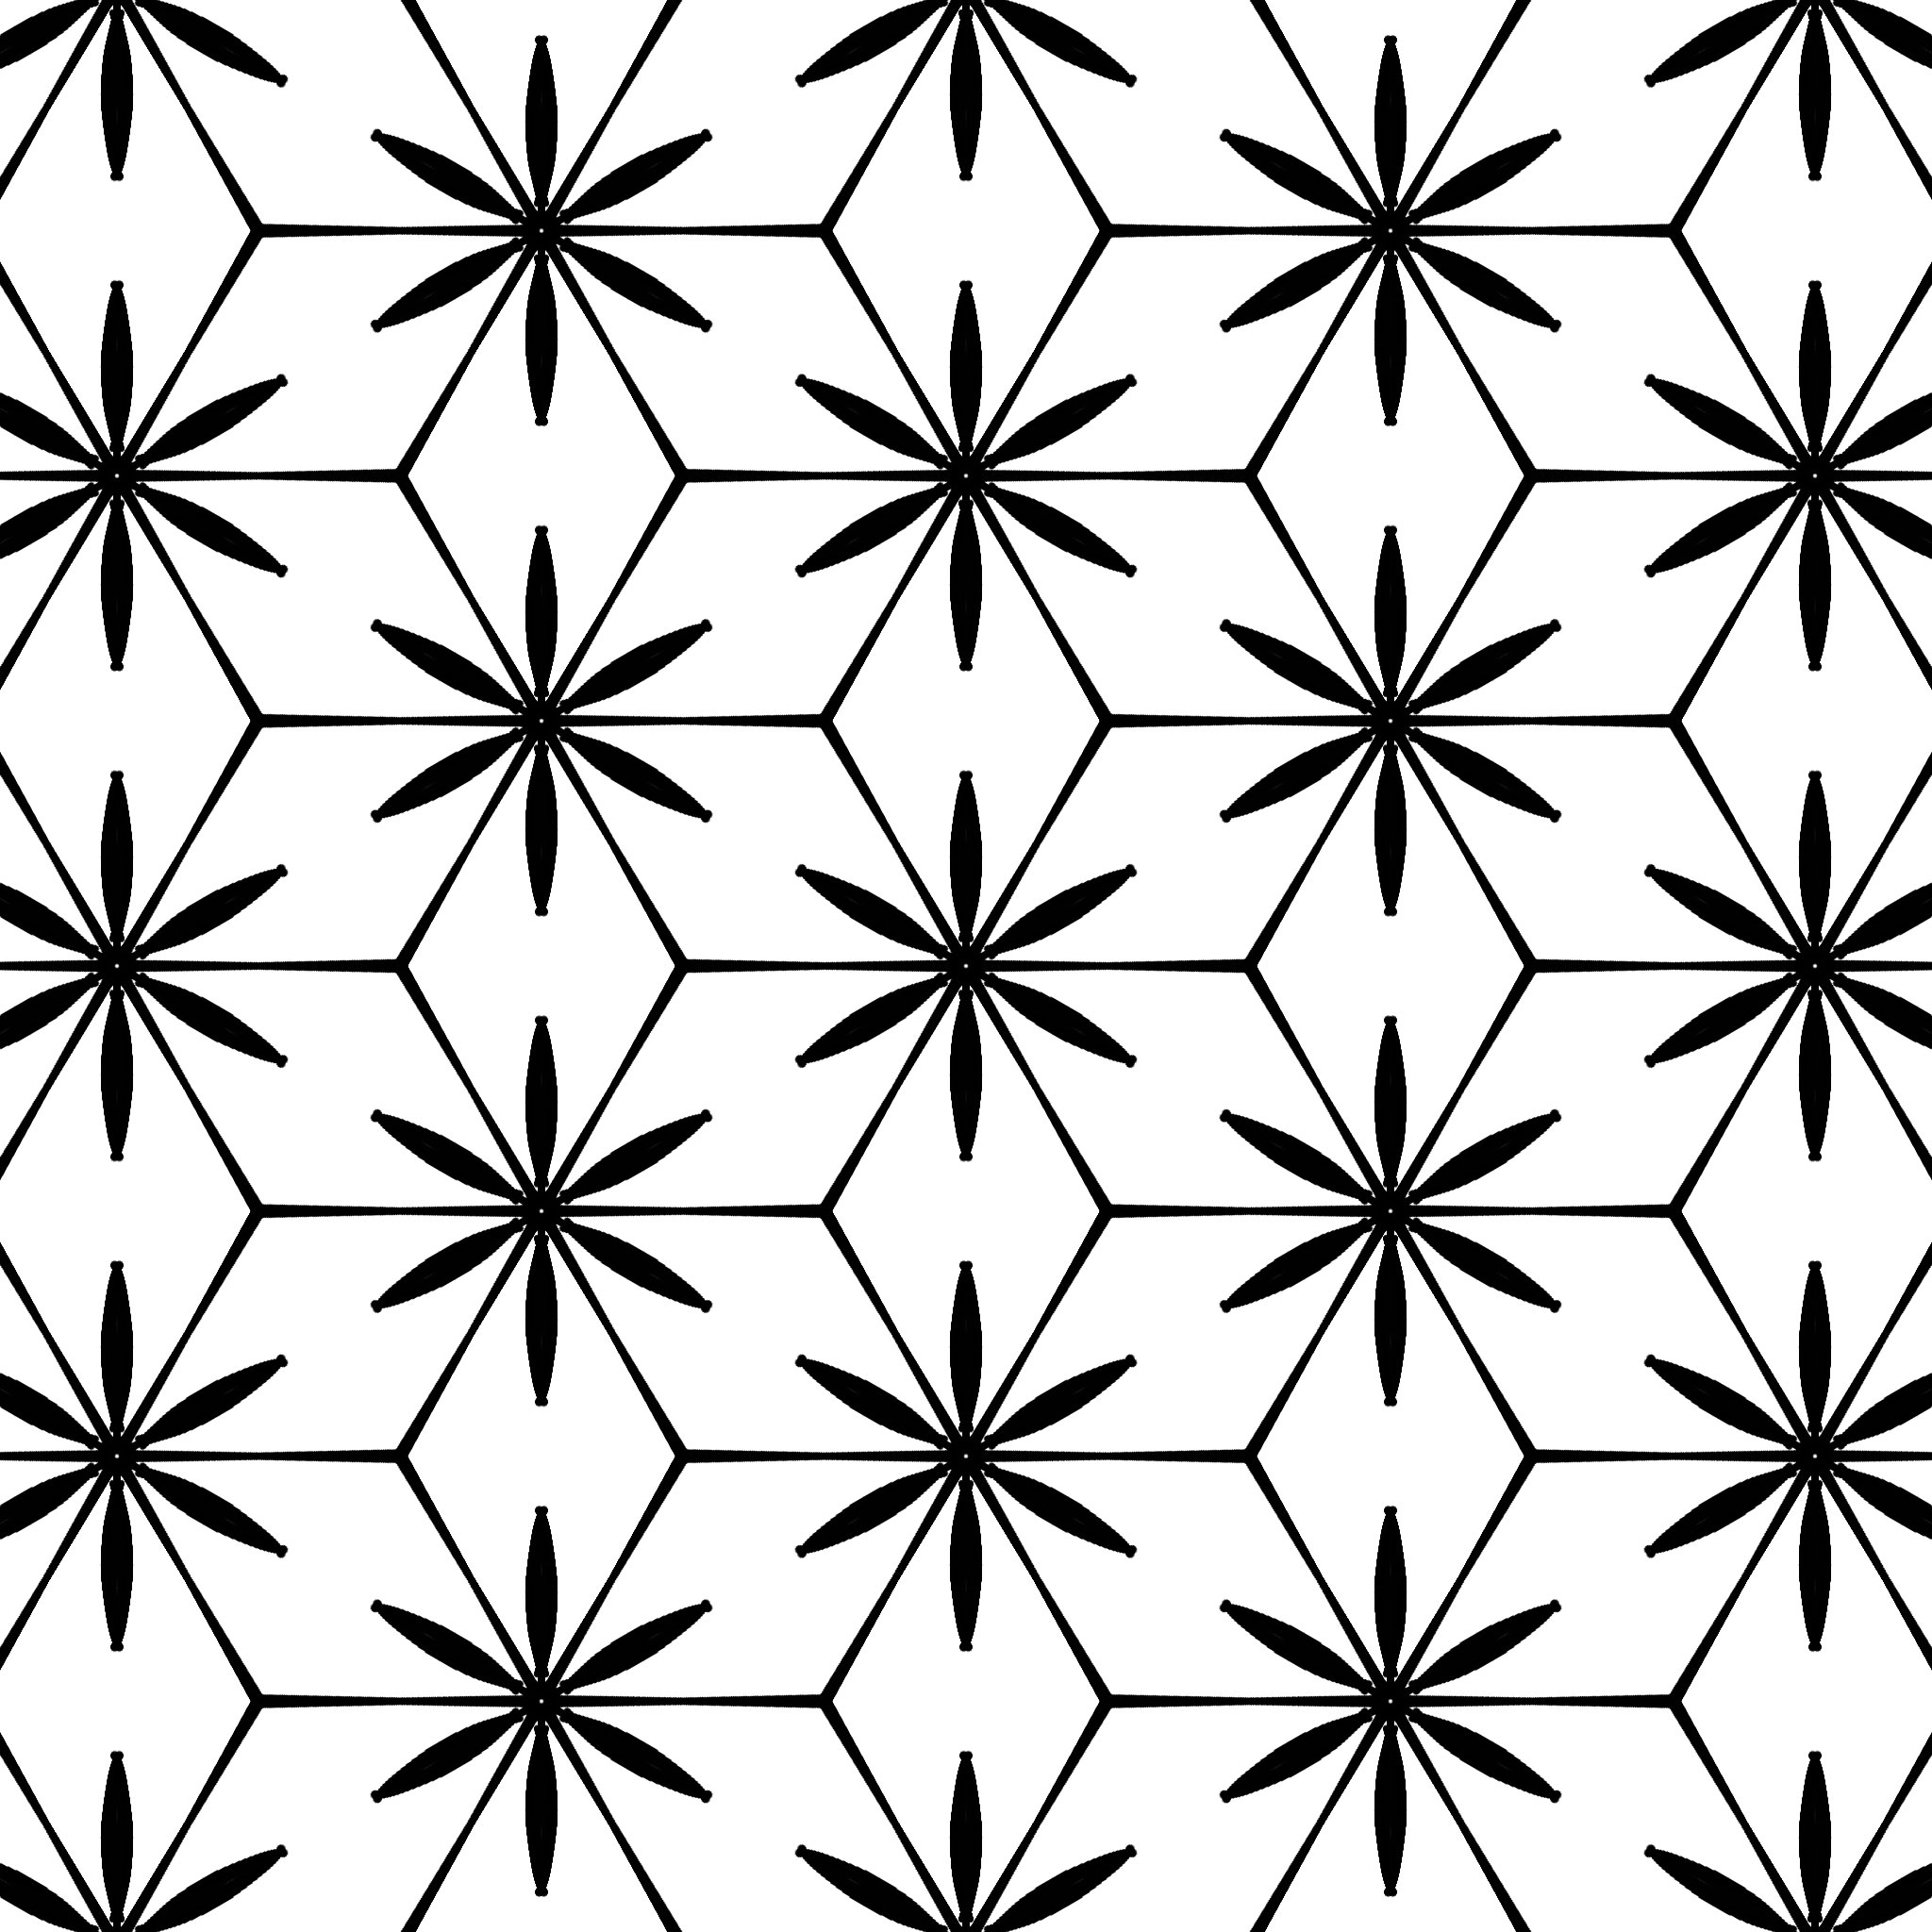 repeated flower pattern background free download